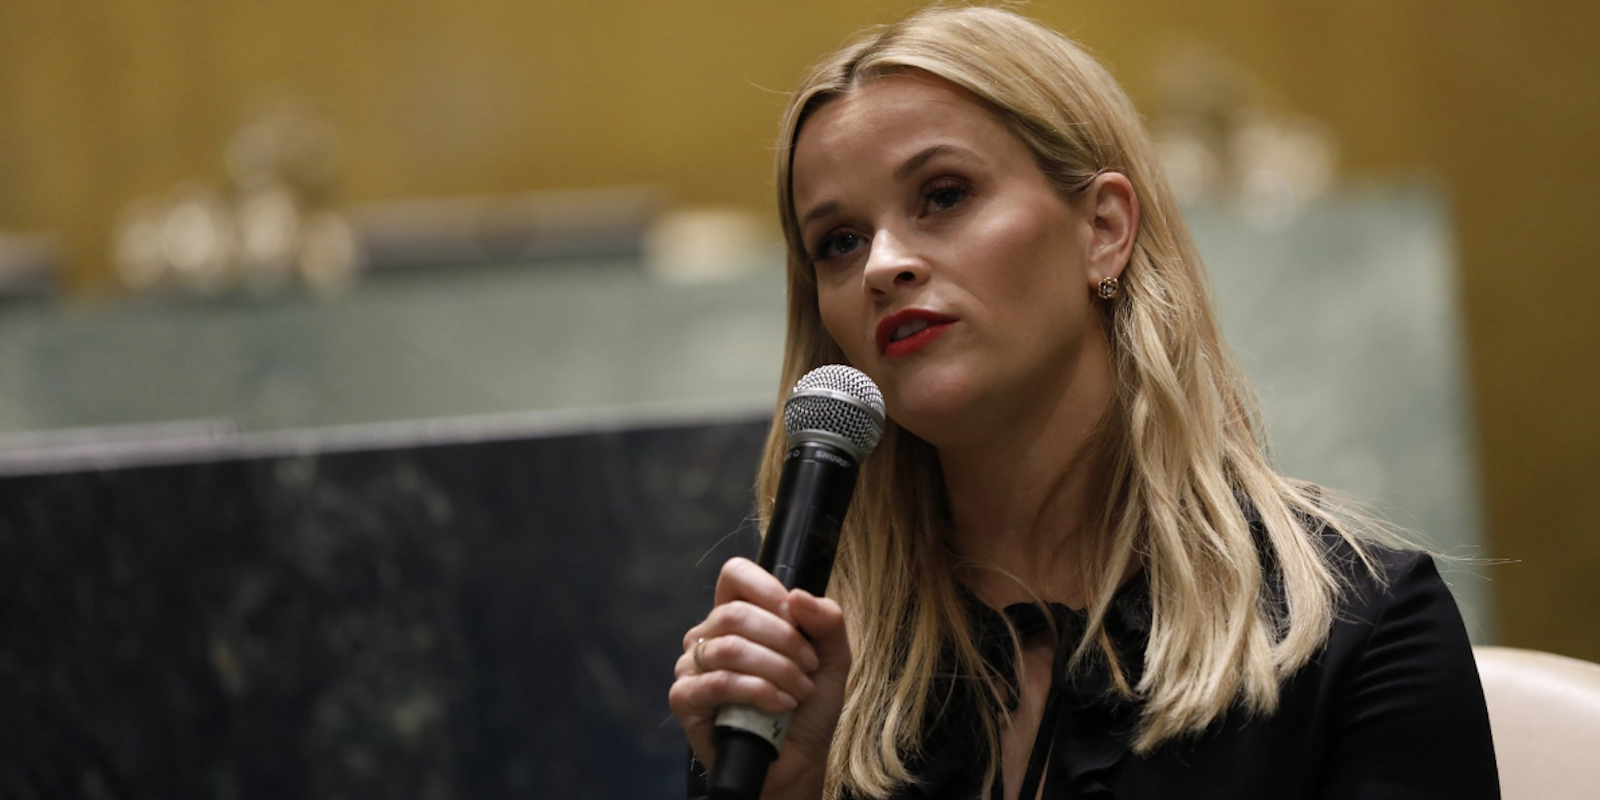 Reese Witherspoon holds a microphone while giving a speech at the UN